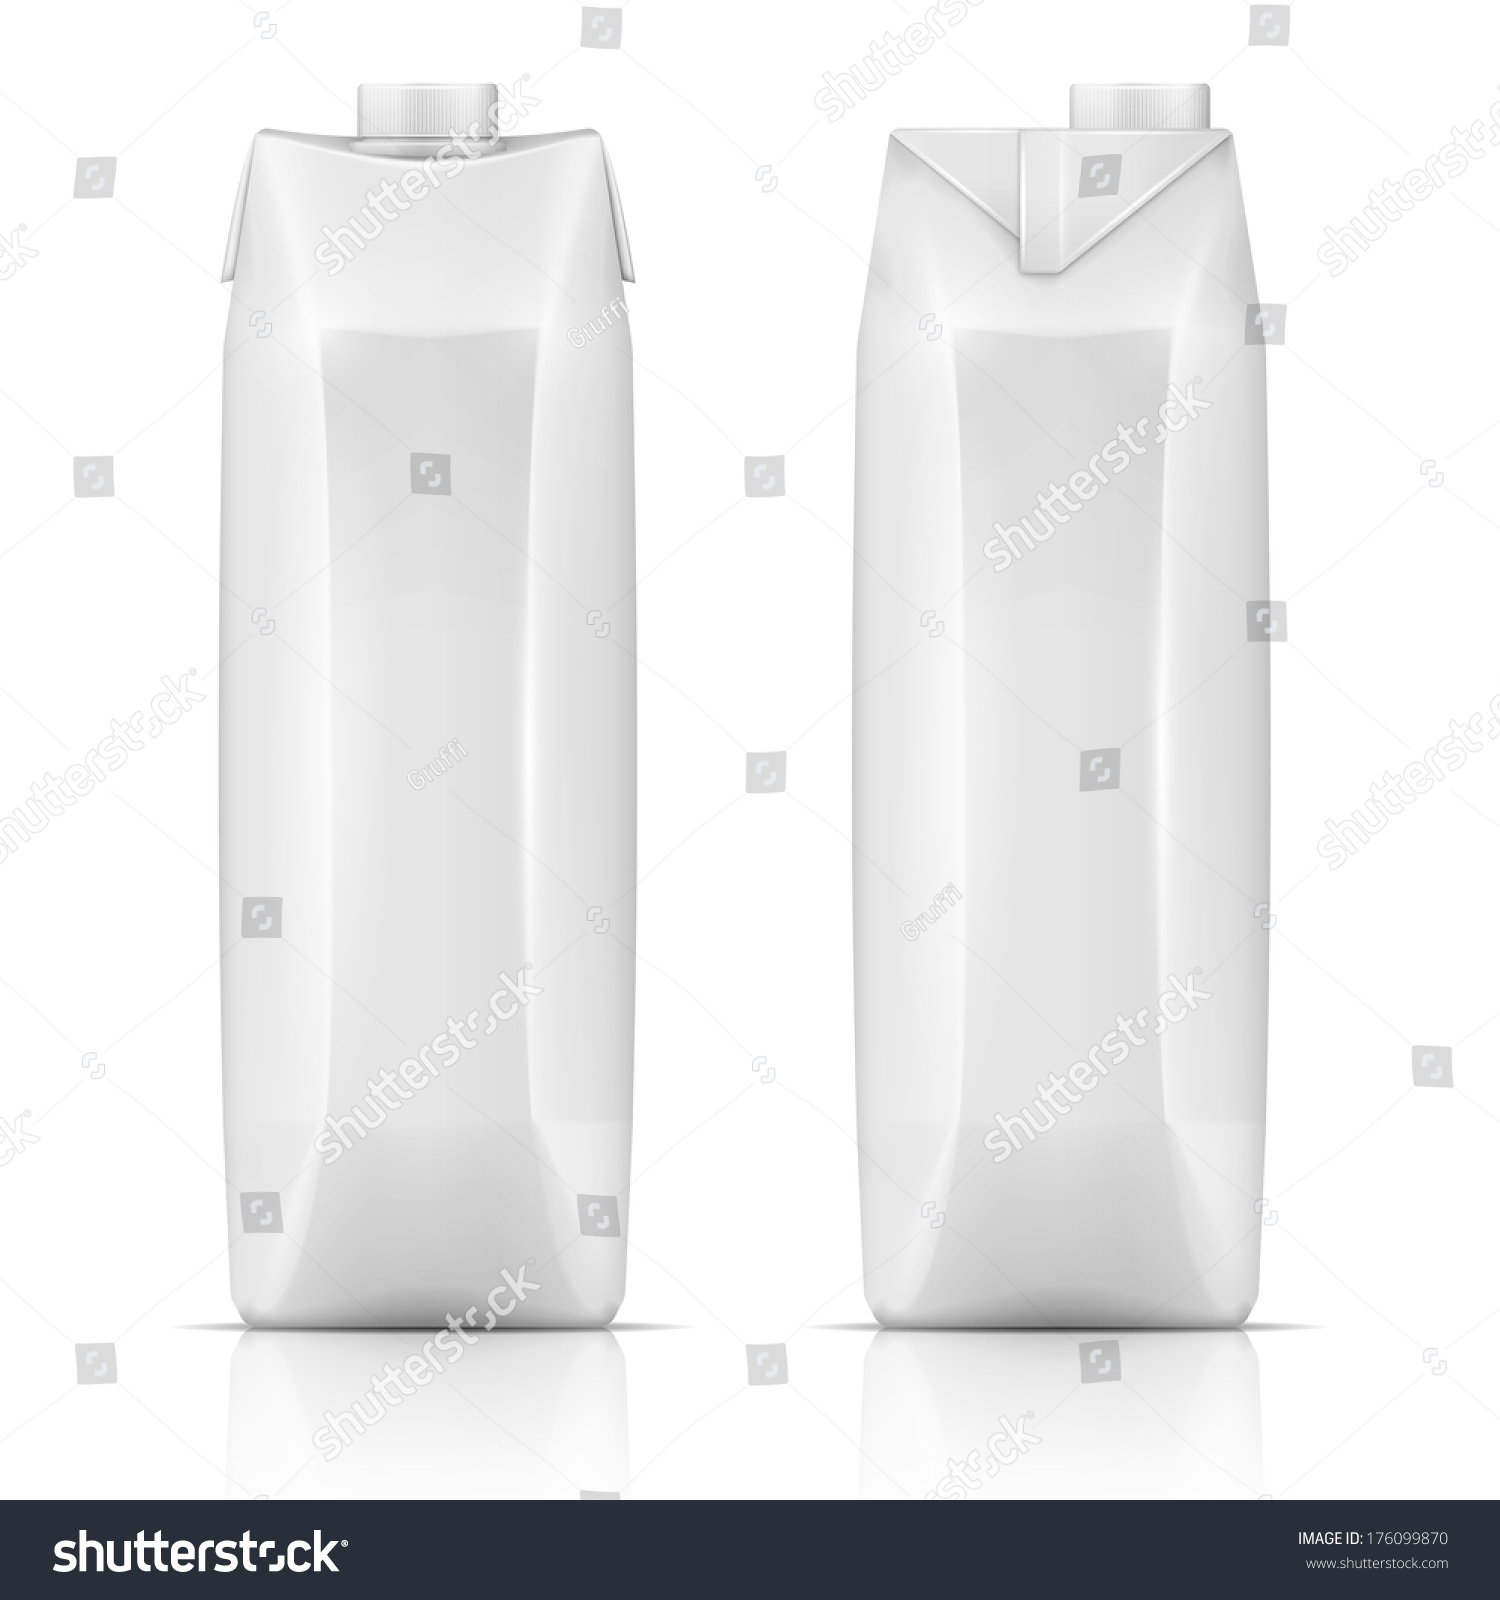 SVG of White carton pack template for beverage: juice, milk. Front and side view. Packaging collection. Vector illustration. svg